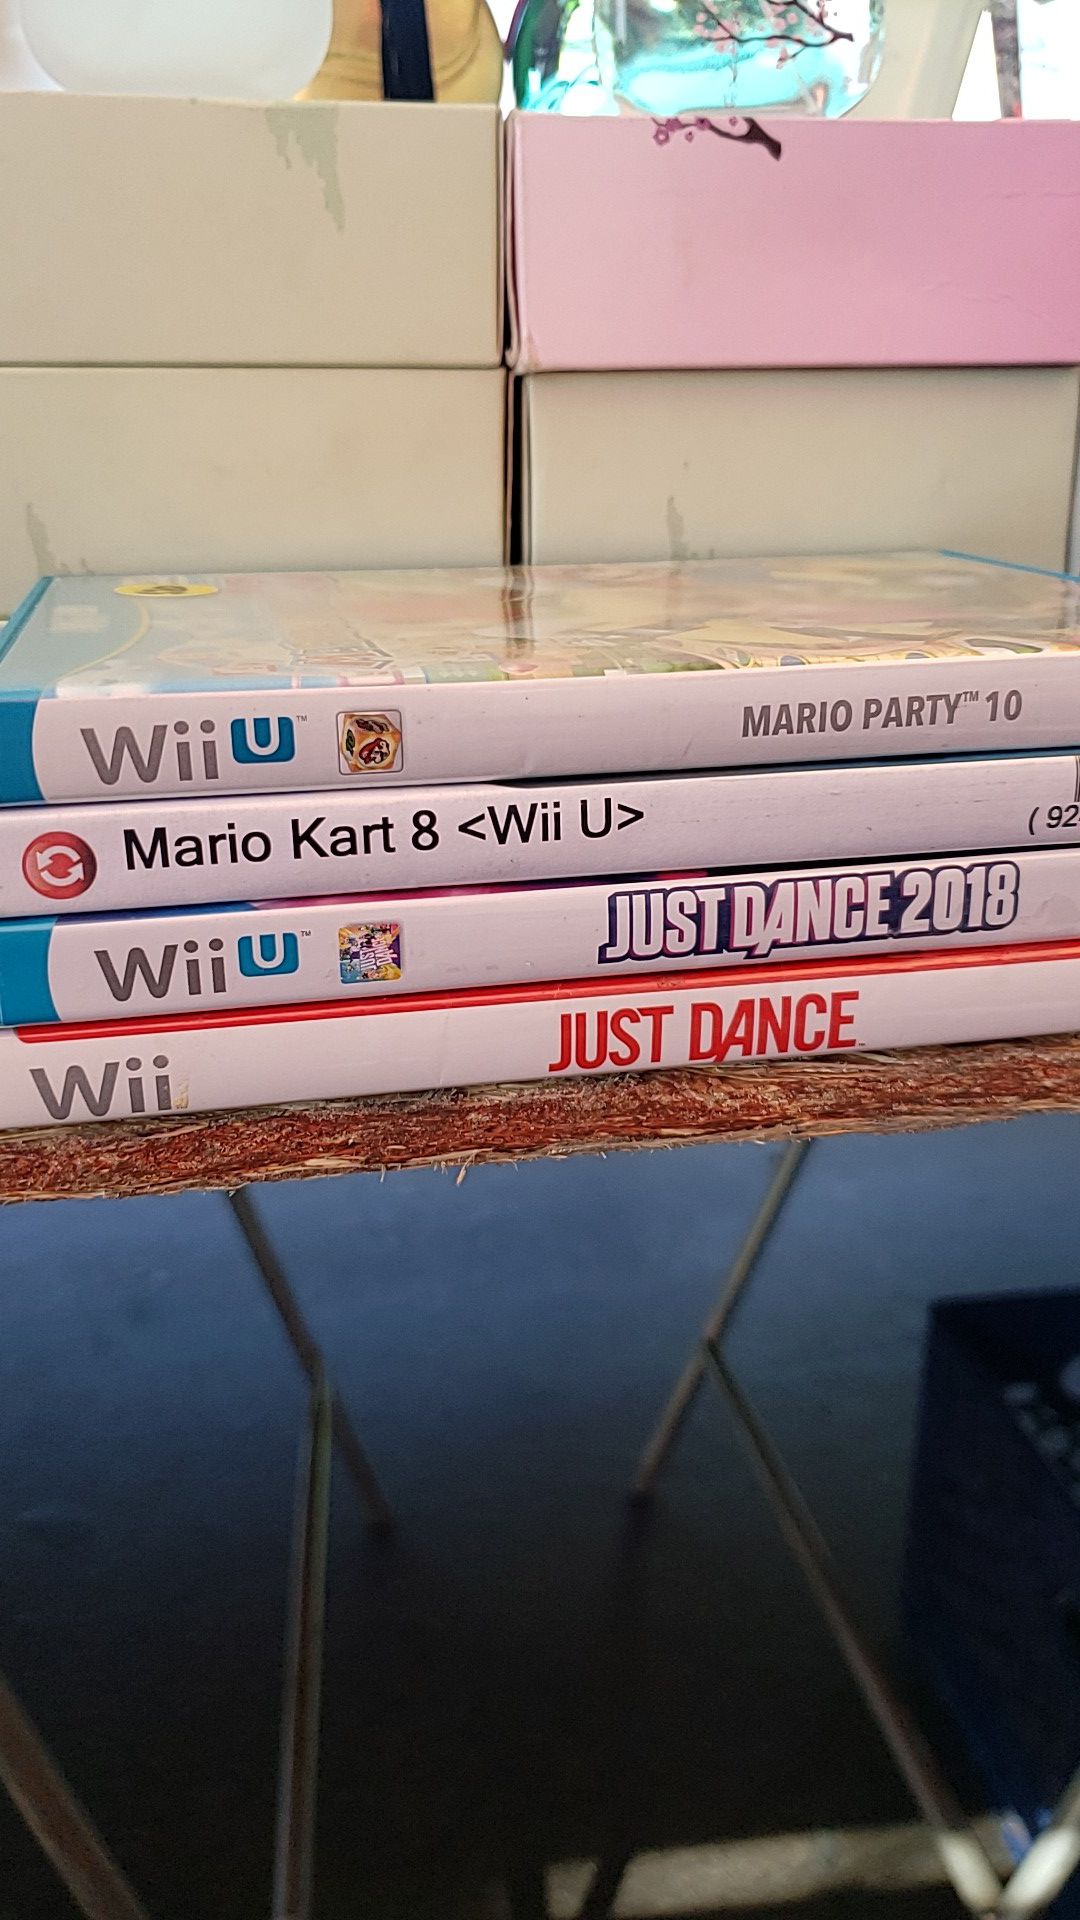 WII And WII U games